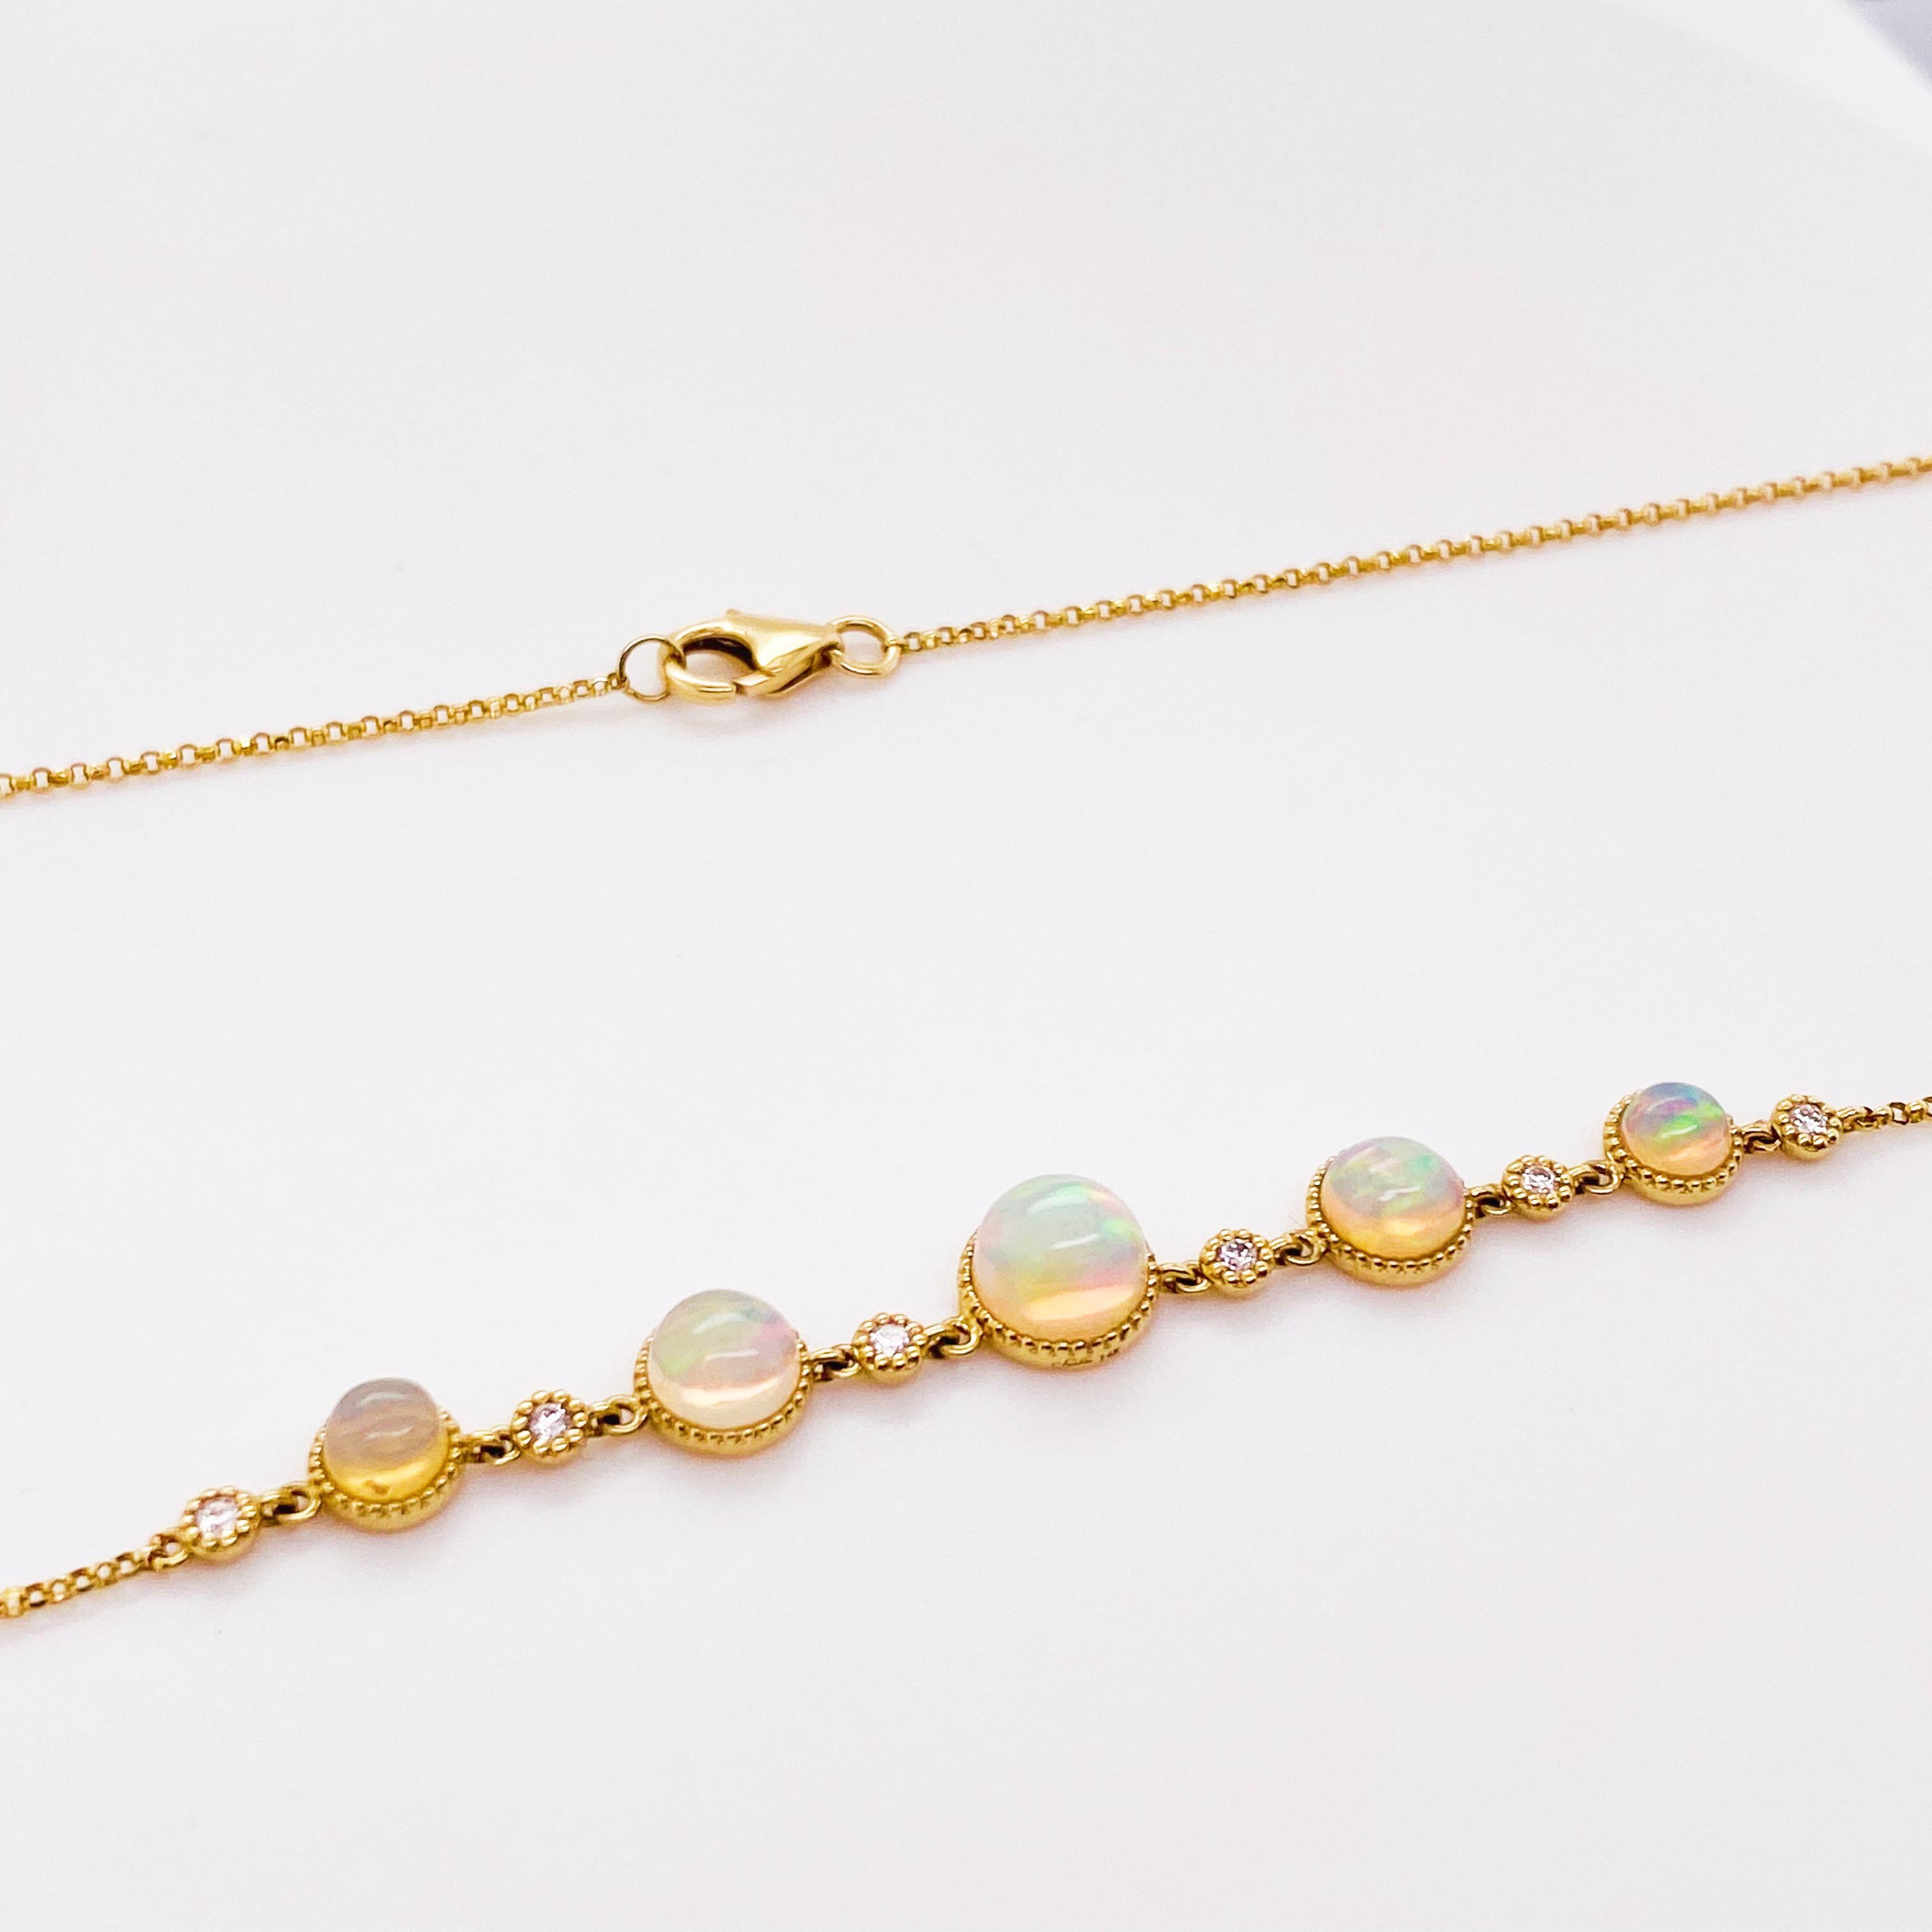 Round Cut Opal and Diamond Necklace Set in 14k Gold Bezel w Beaded Chain, 1.00 Carat Opals